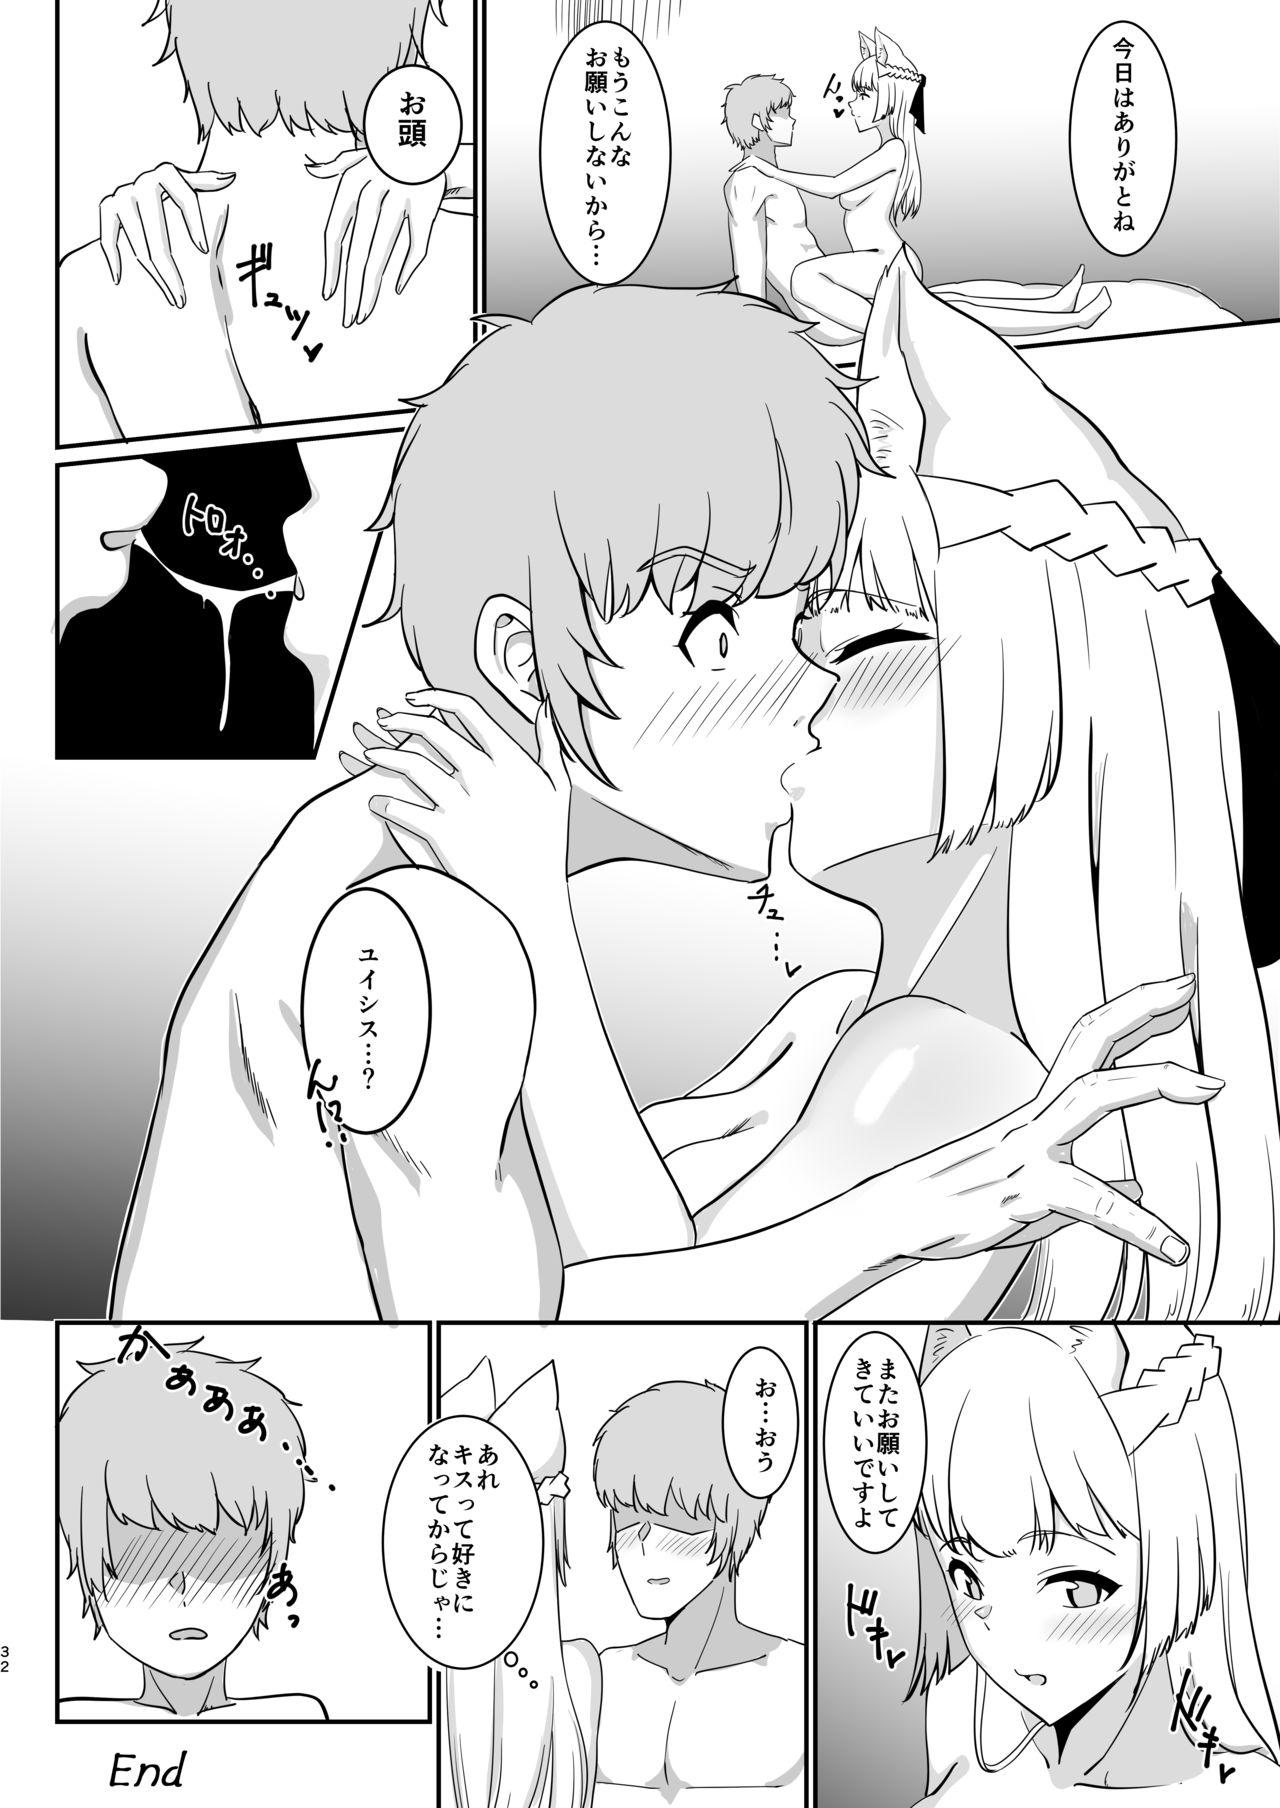 Orgasmus 愛の義侠騎士 - Granblue fantasy Mouth - Page 33